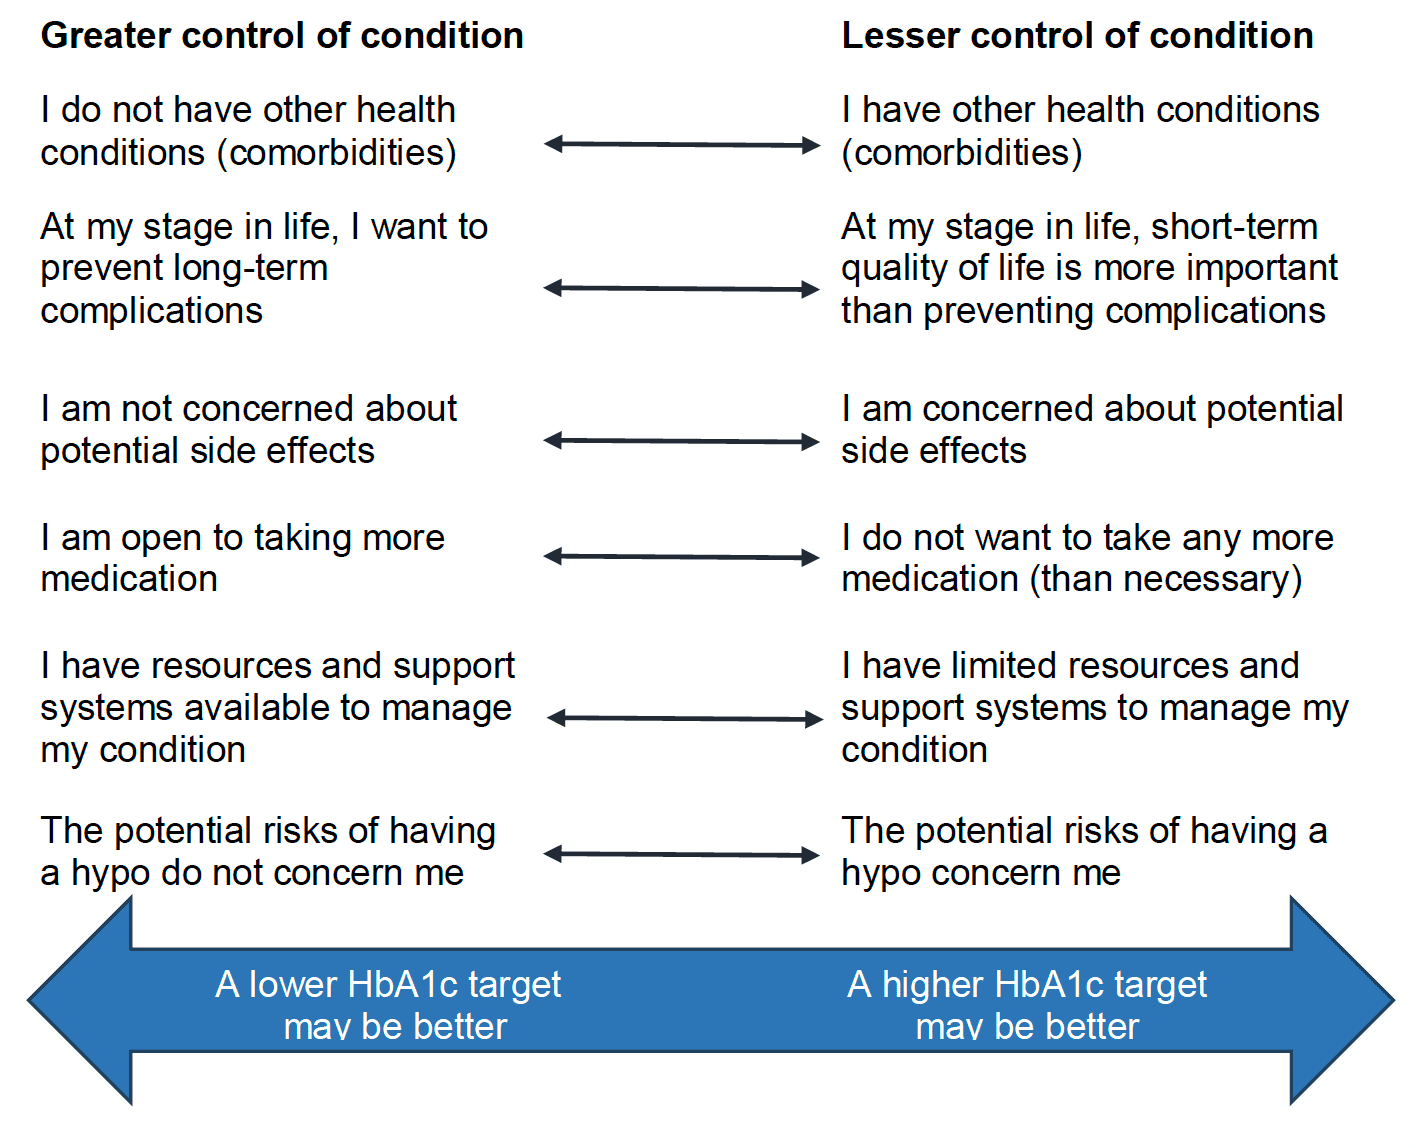 Representation of a scale for considering treatment aims and whether a lower or higher HbA1c target would be better for the individual